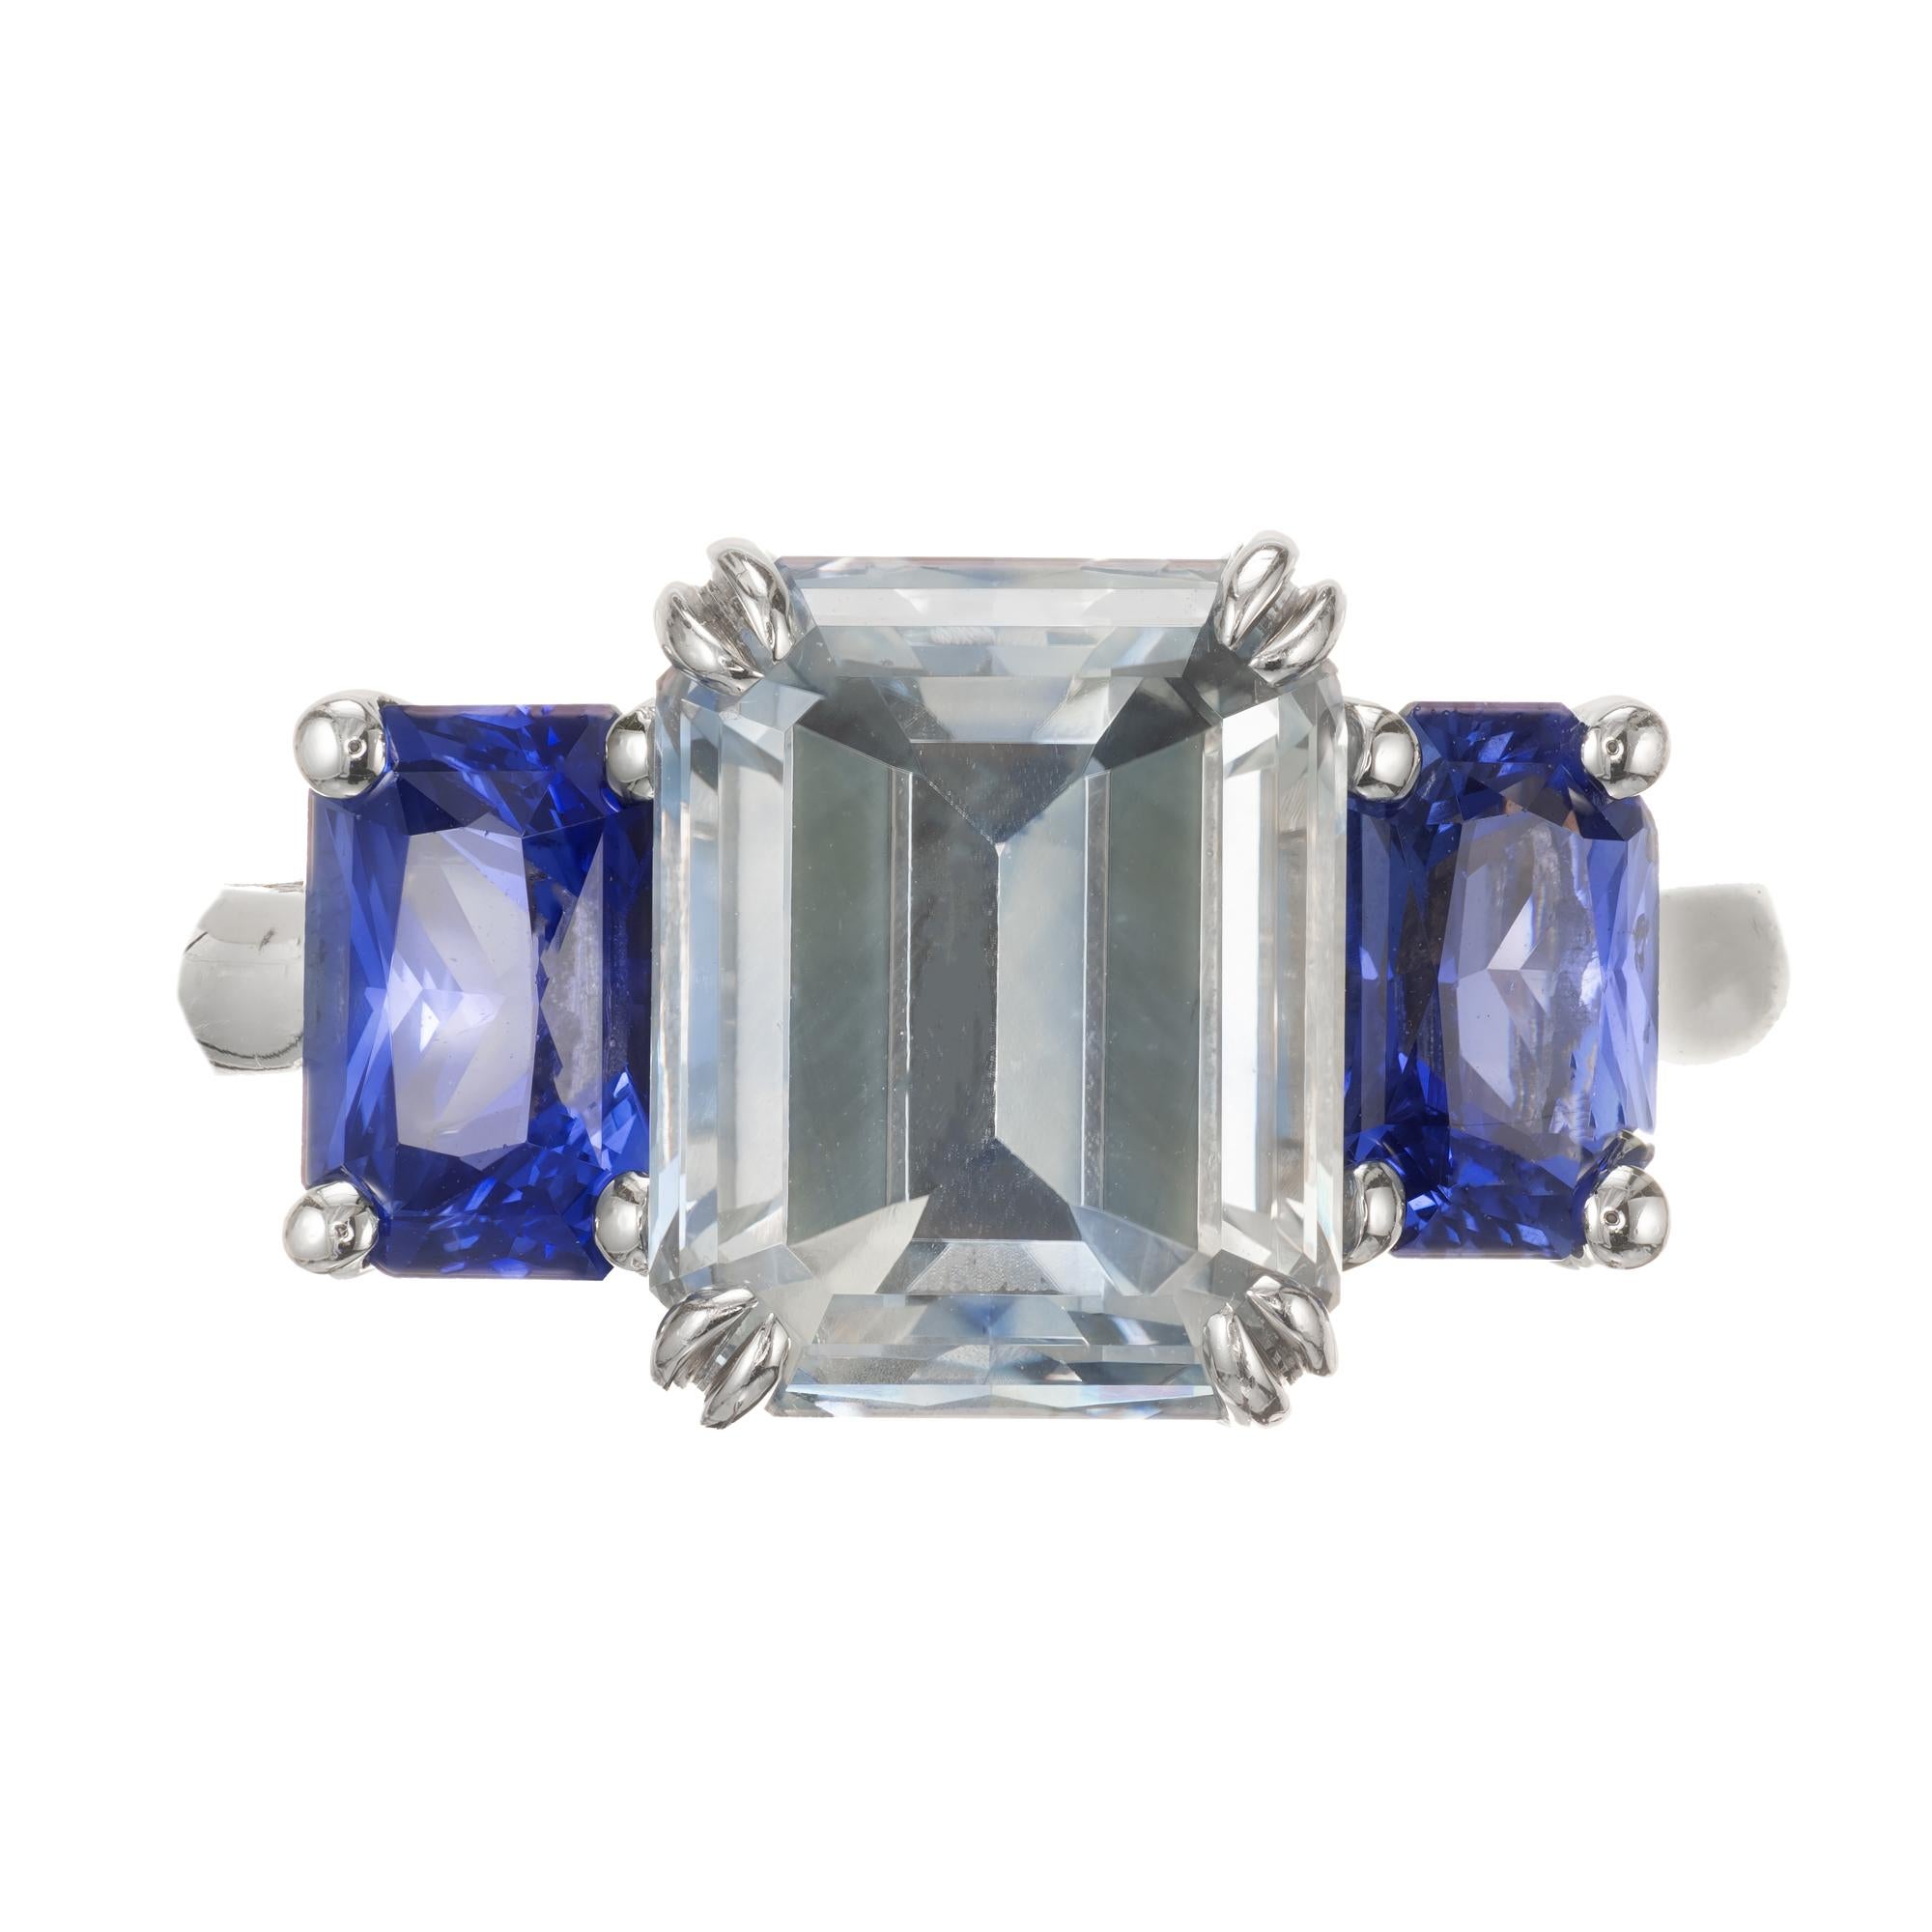 Natural AGL certified three-stone sapphire engagement ring. Emerald cut center sapphire sapphire,  AGL certified natural light gray blue white.  The light blue is a slightly purplish light blue, the gray cast is barely visible. There is some zoning